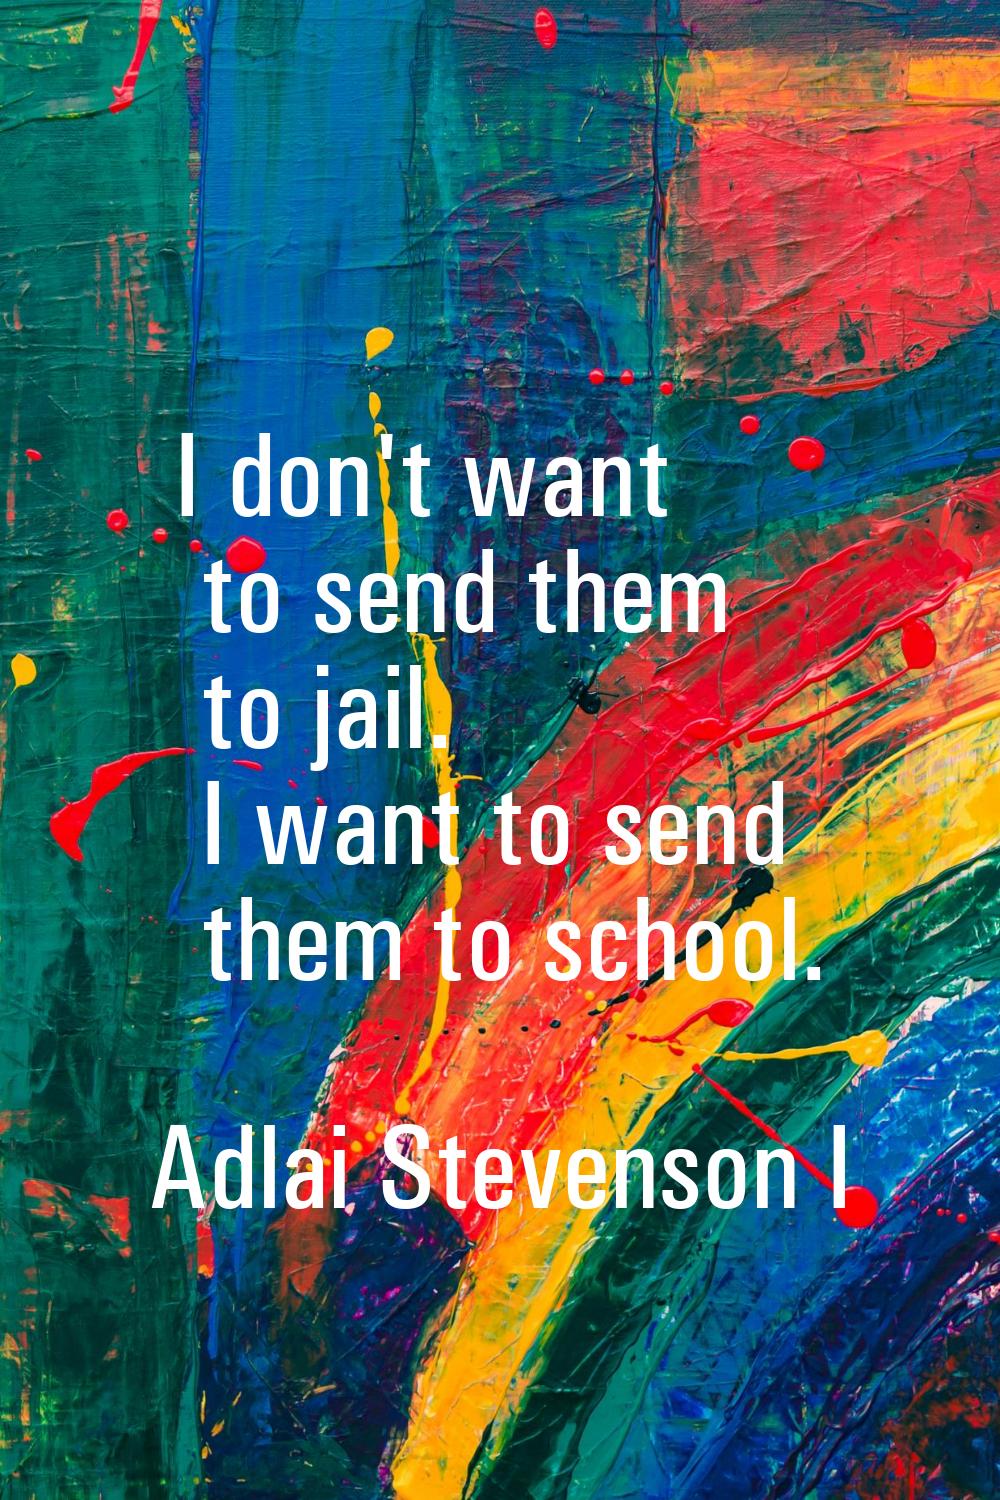 I don't want to send them to jail. I want to send them to school.